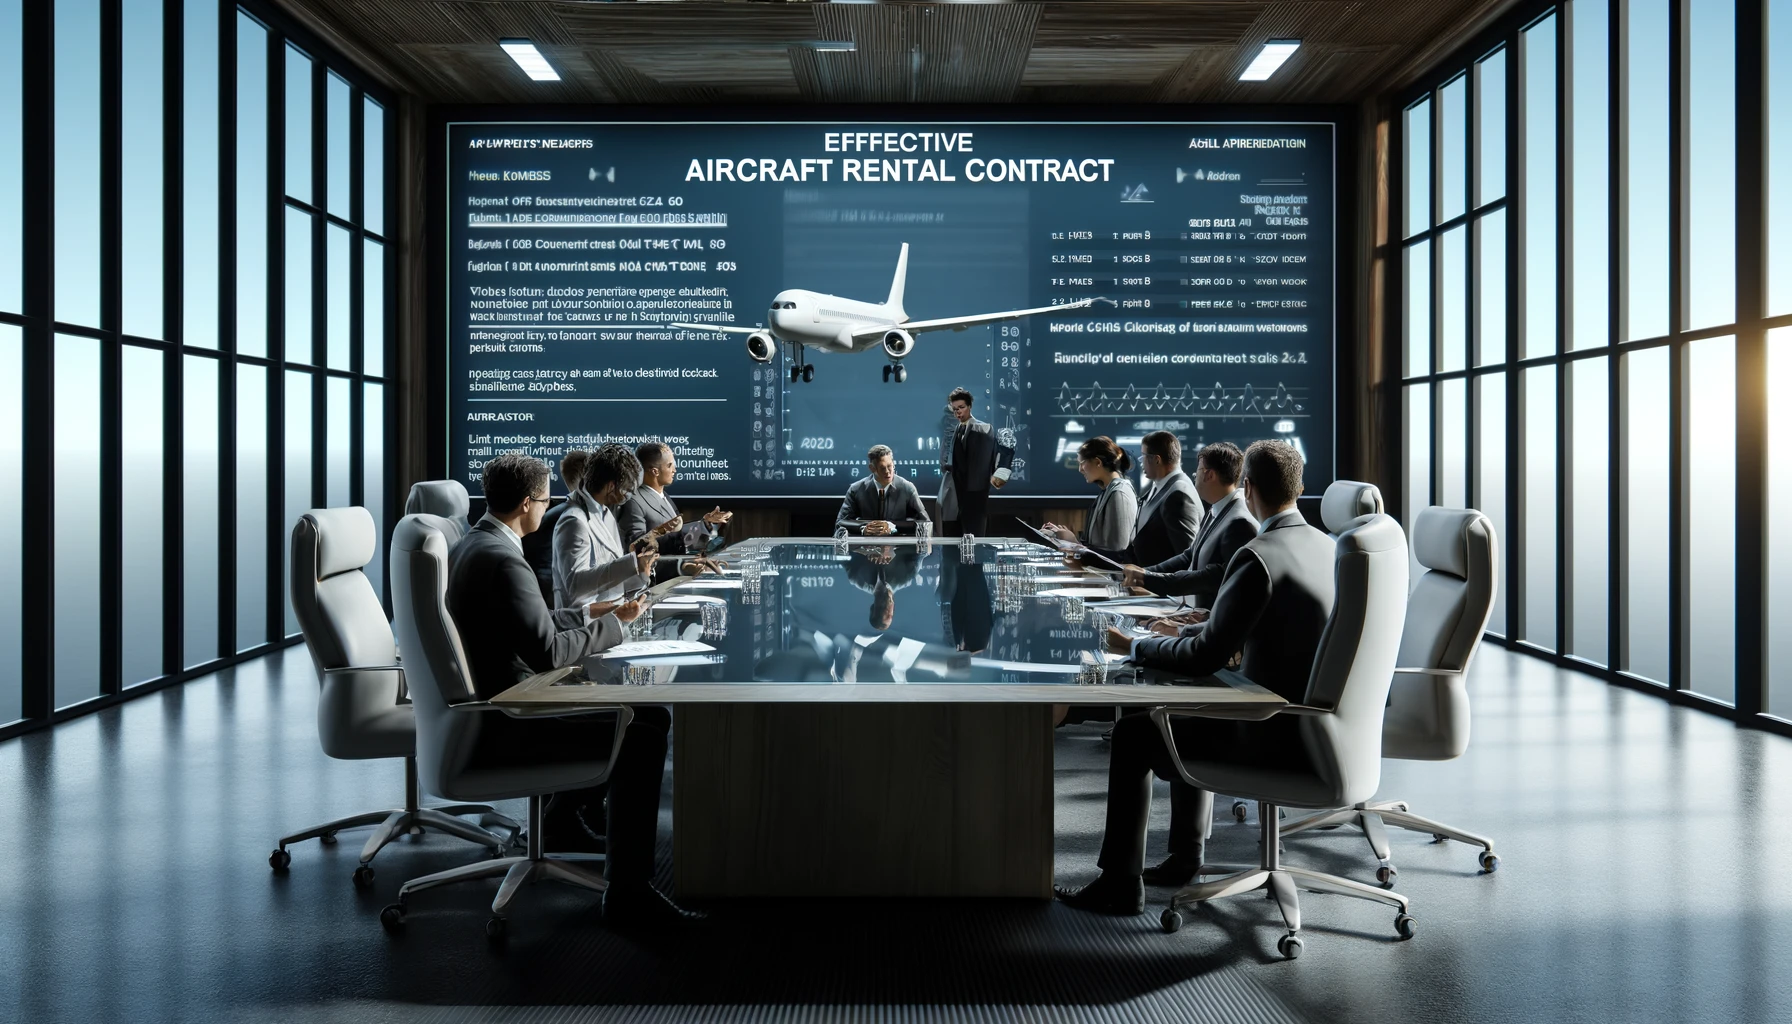 Effective Aircraft Rental Contracts. Corporate meeting room with a group of aviation professionalists